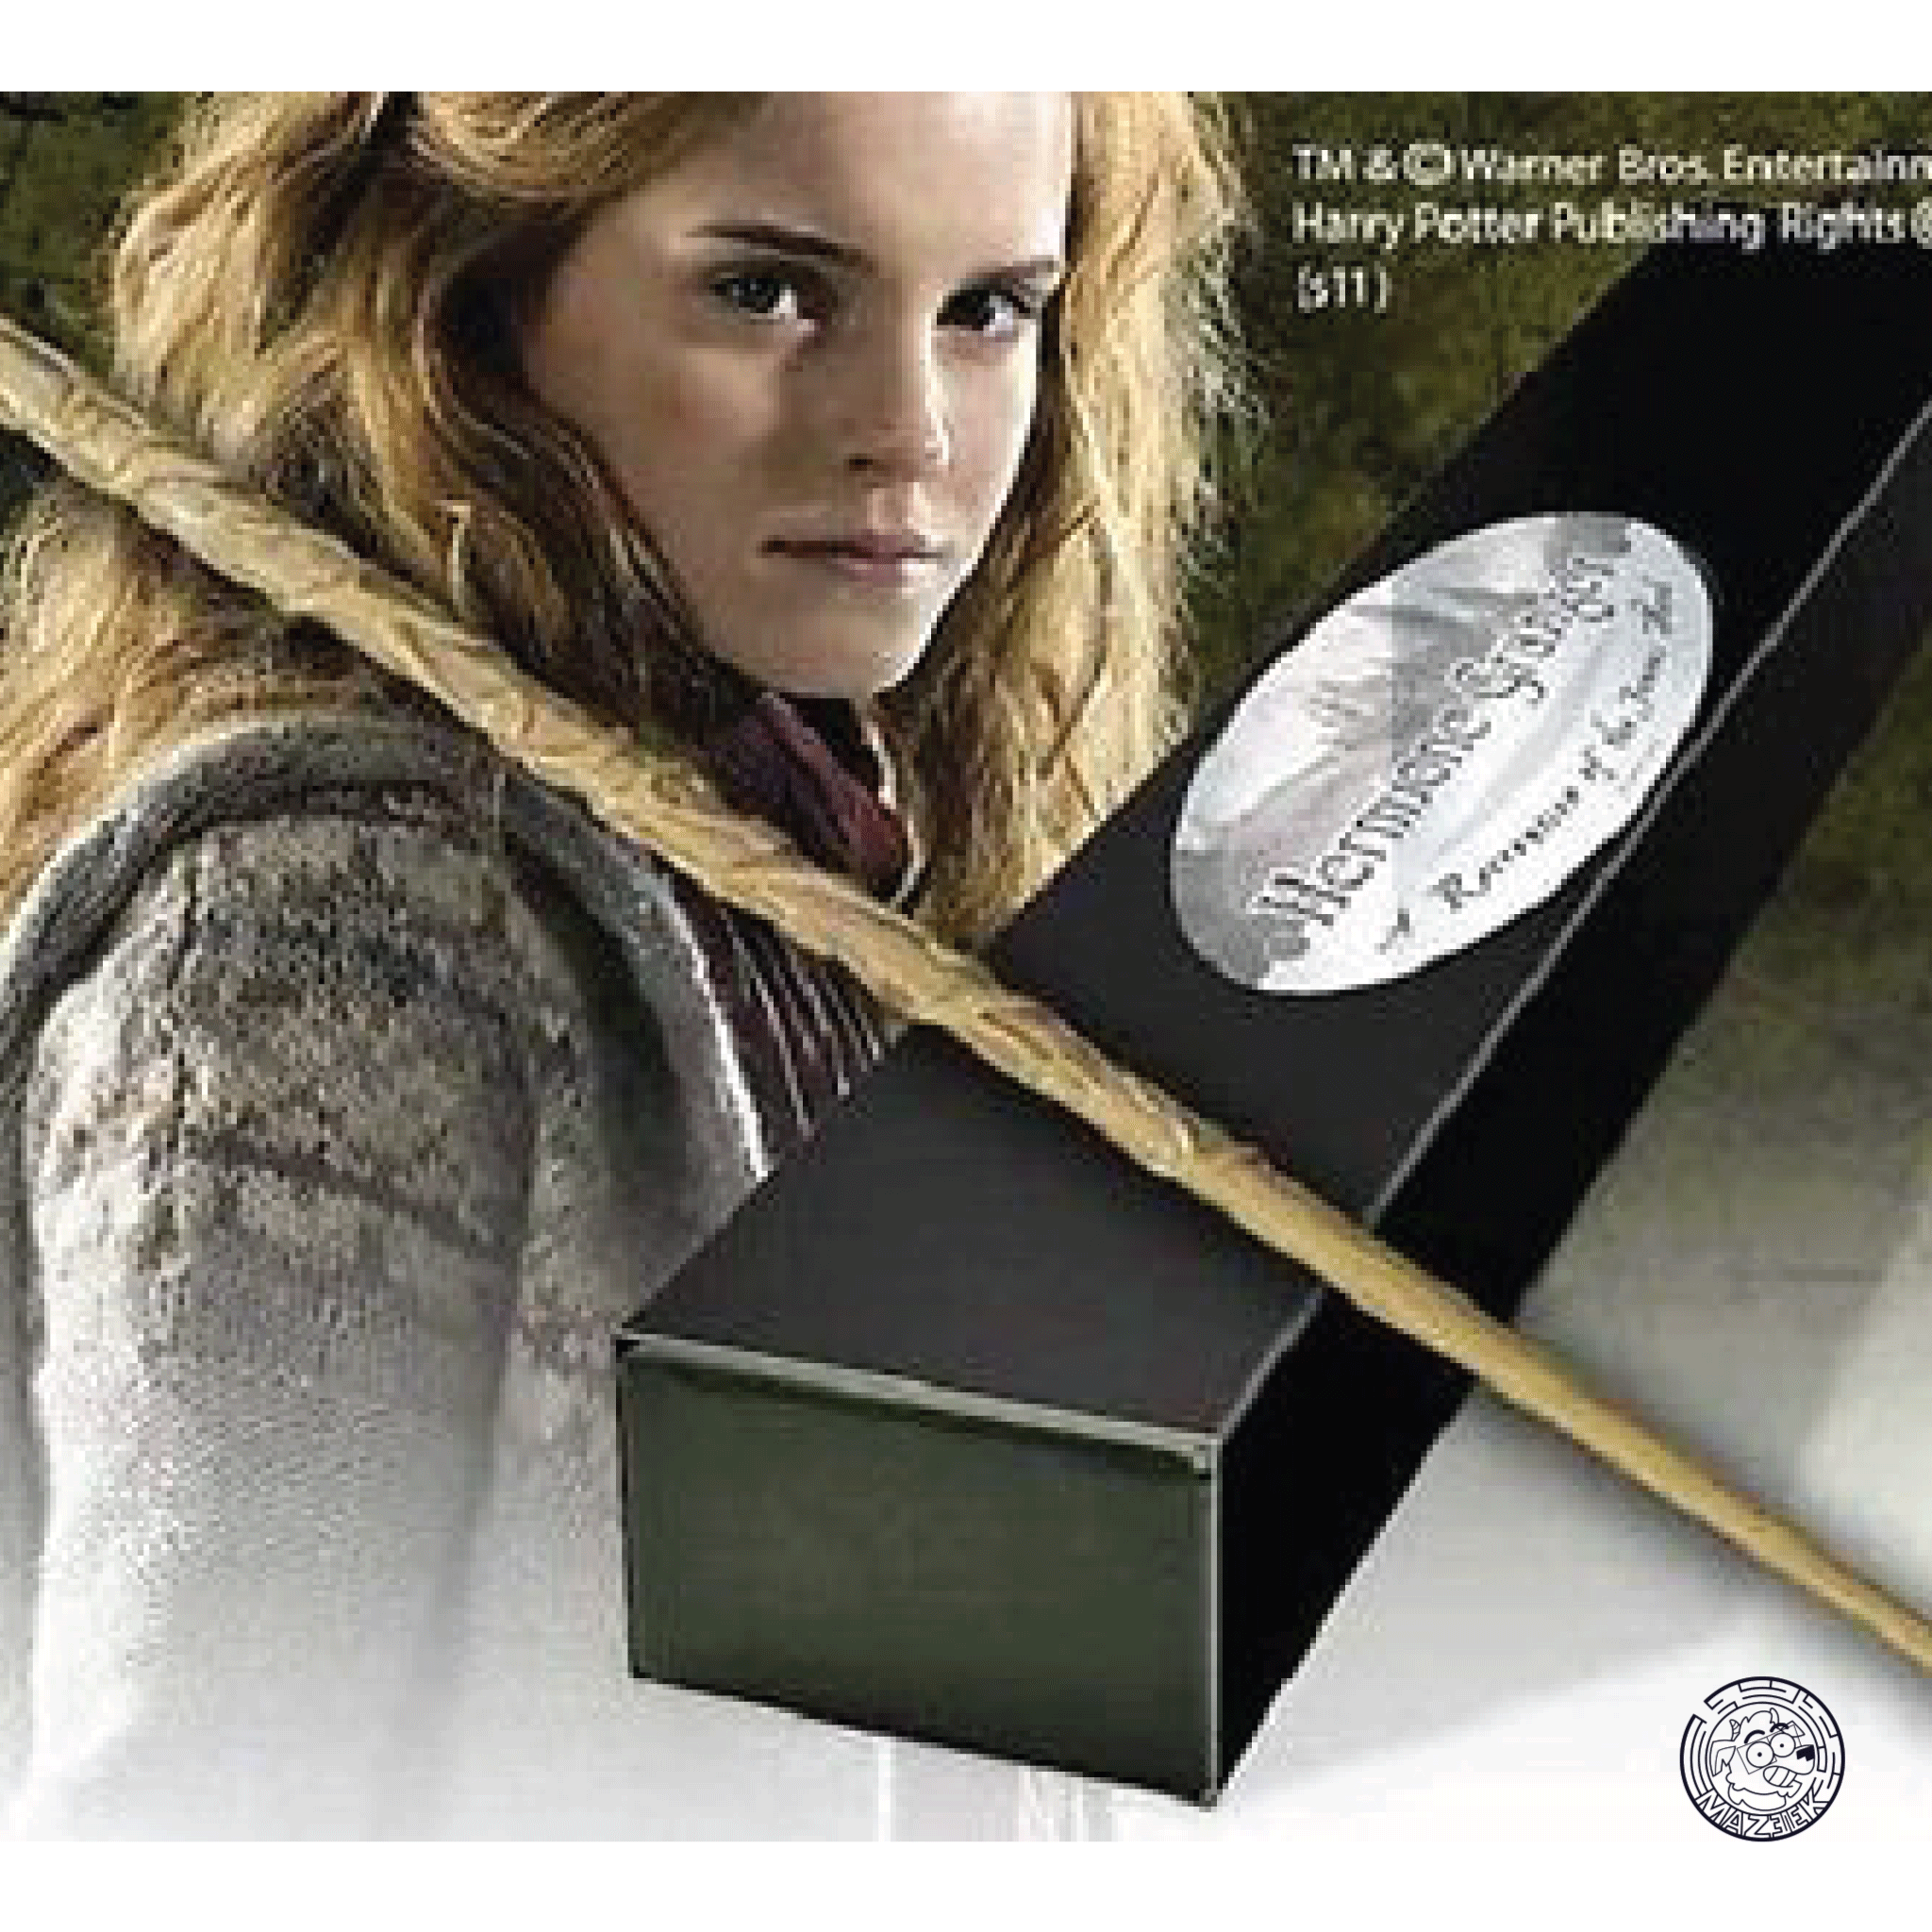 Harry Potter Magic Wand: Hermione Granger Character Edition ORIGINAL